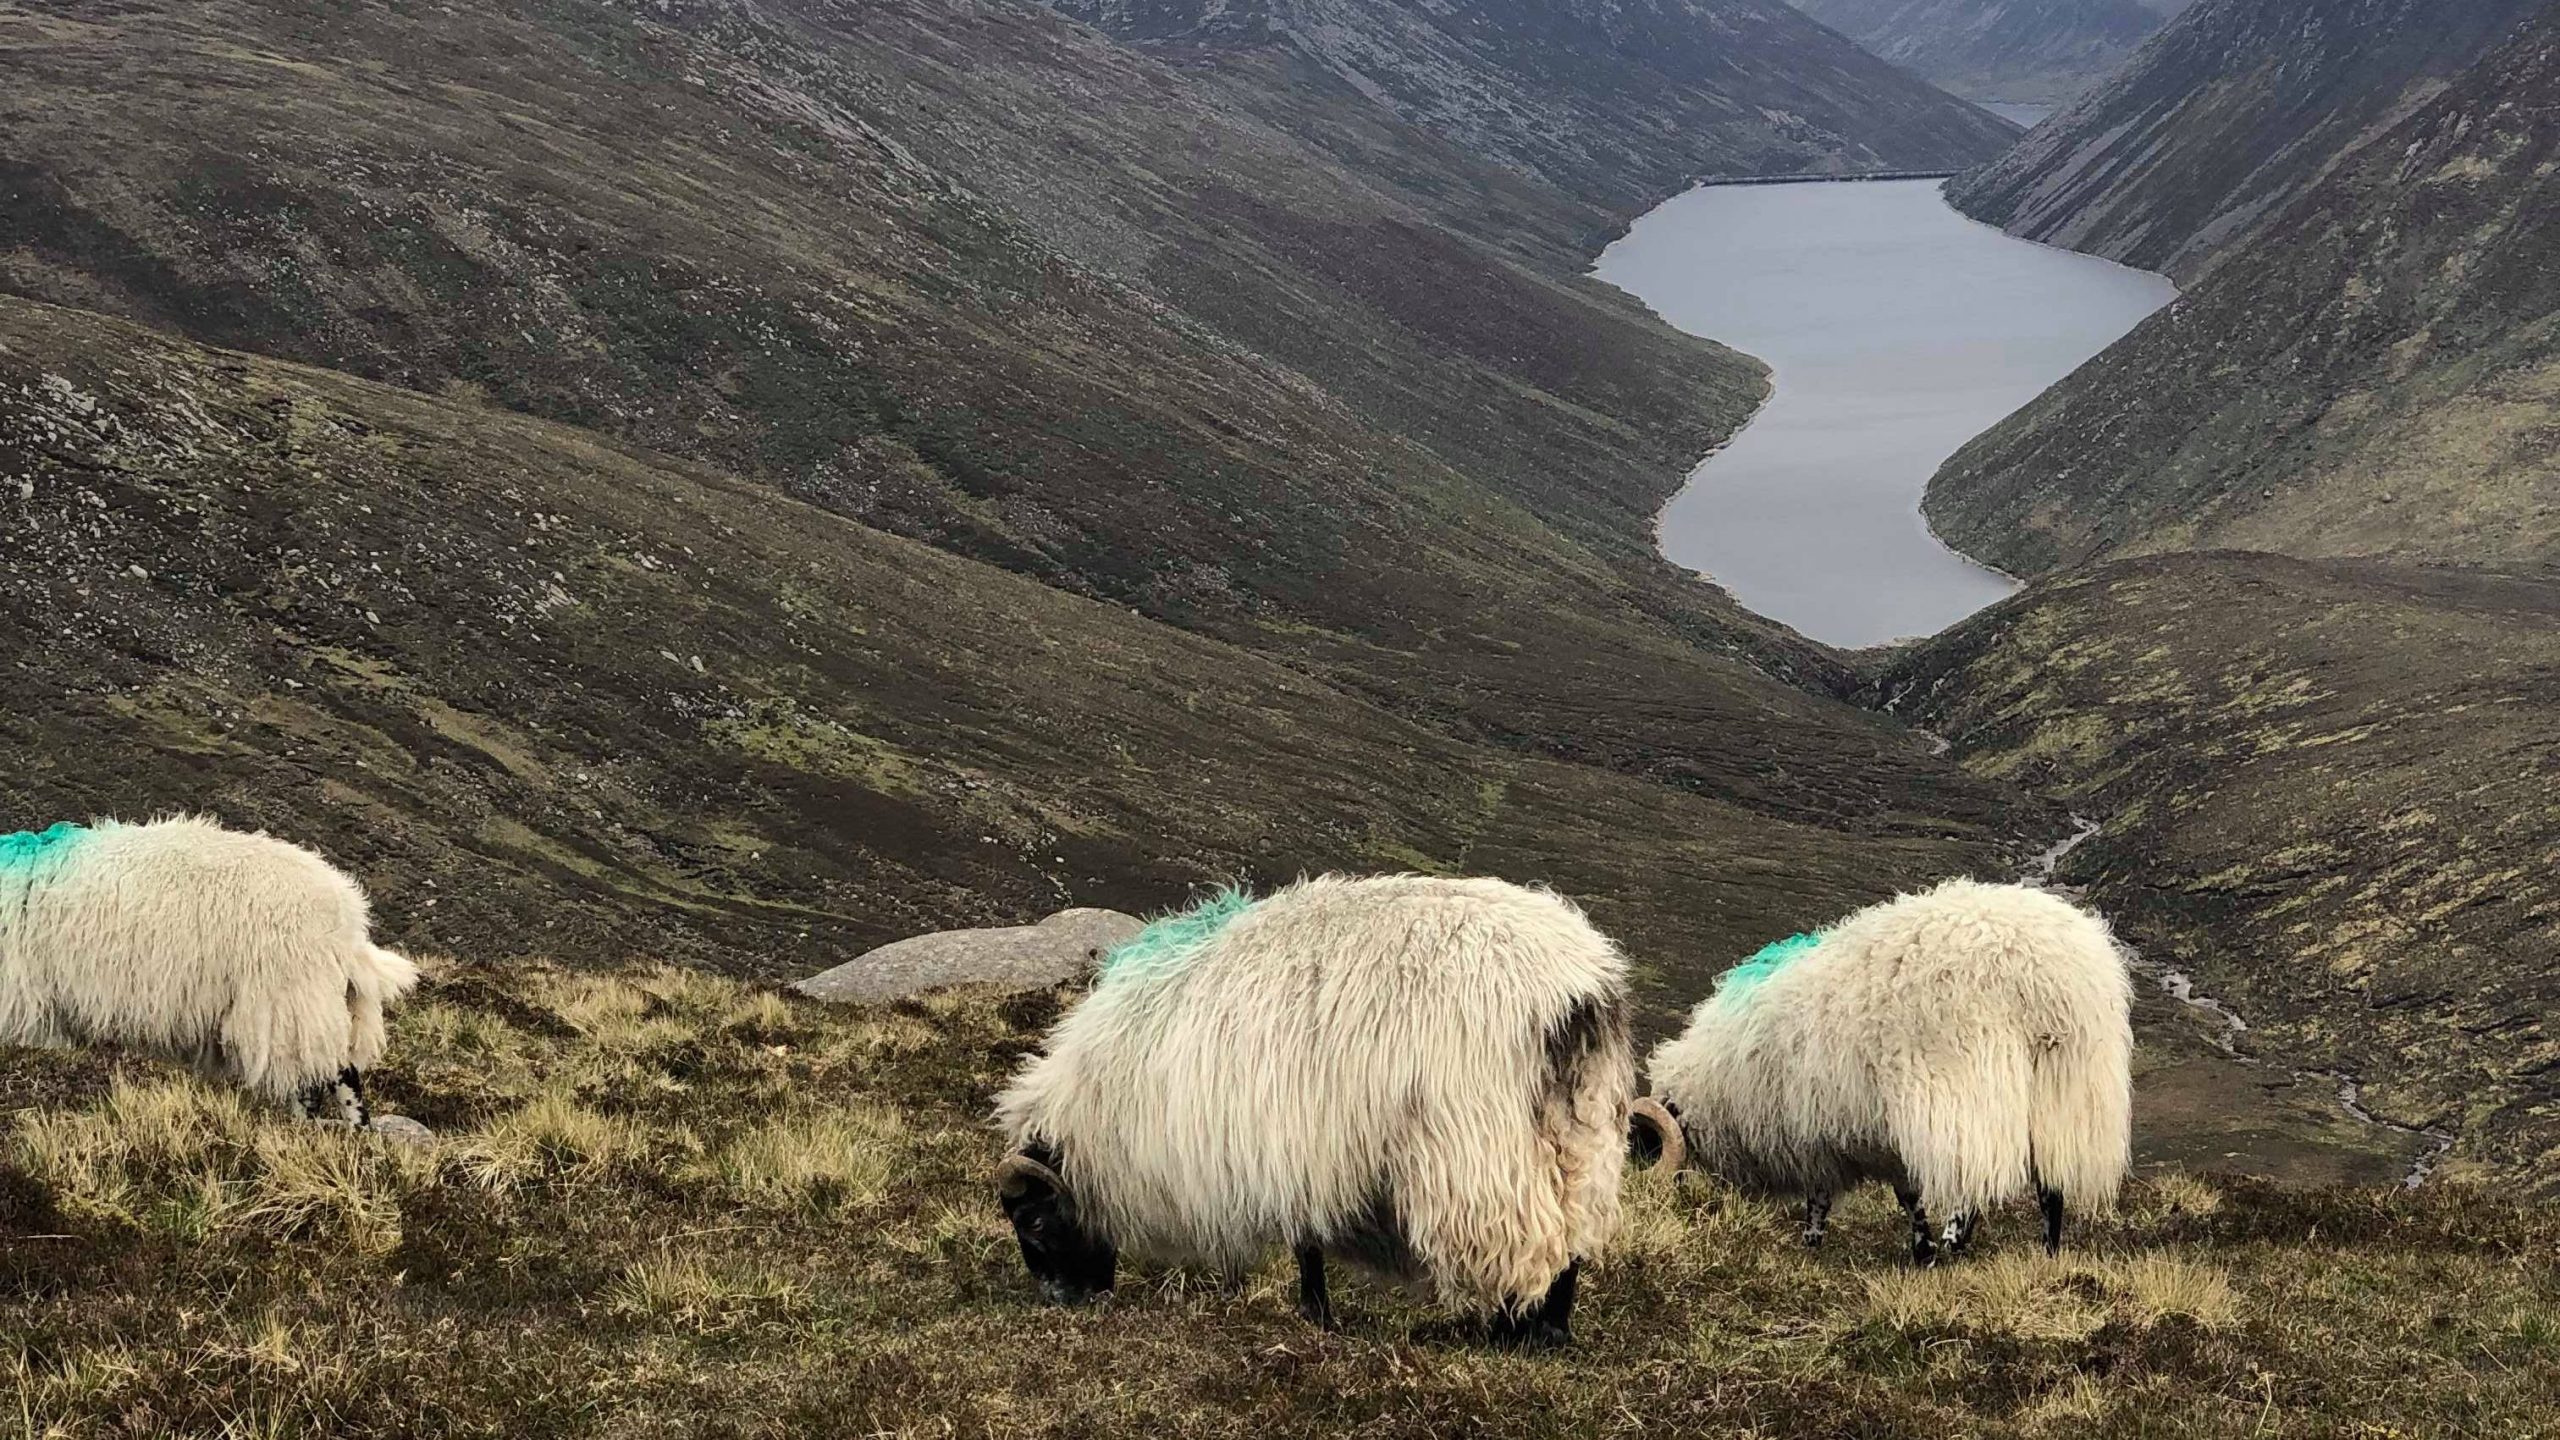 Sheep grazing on the side of a mountain in UK